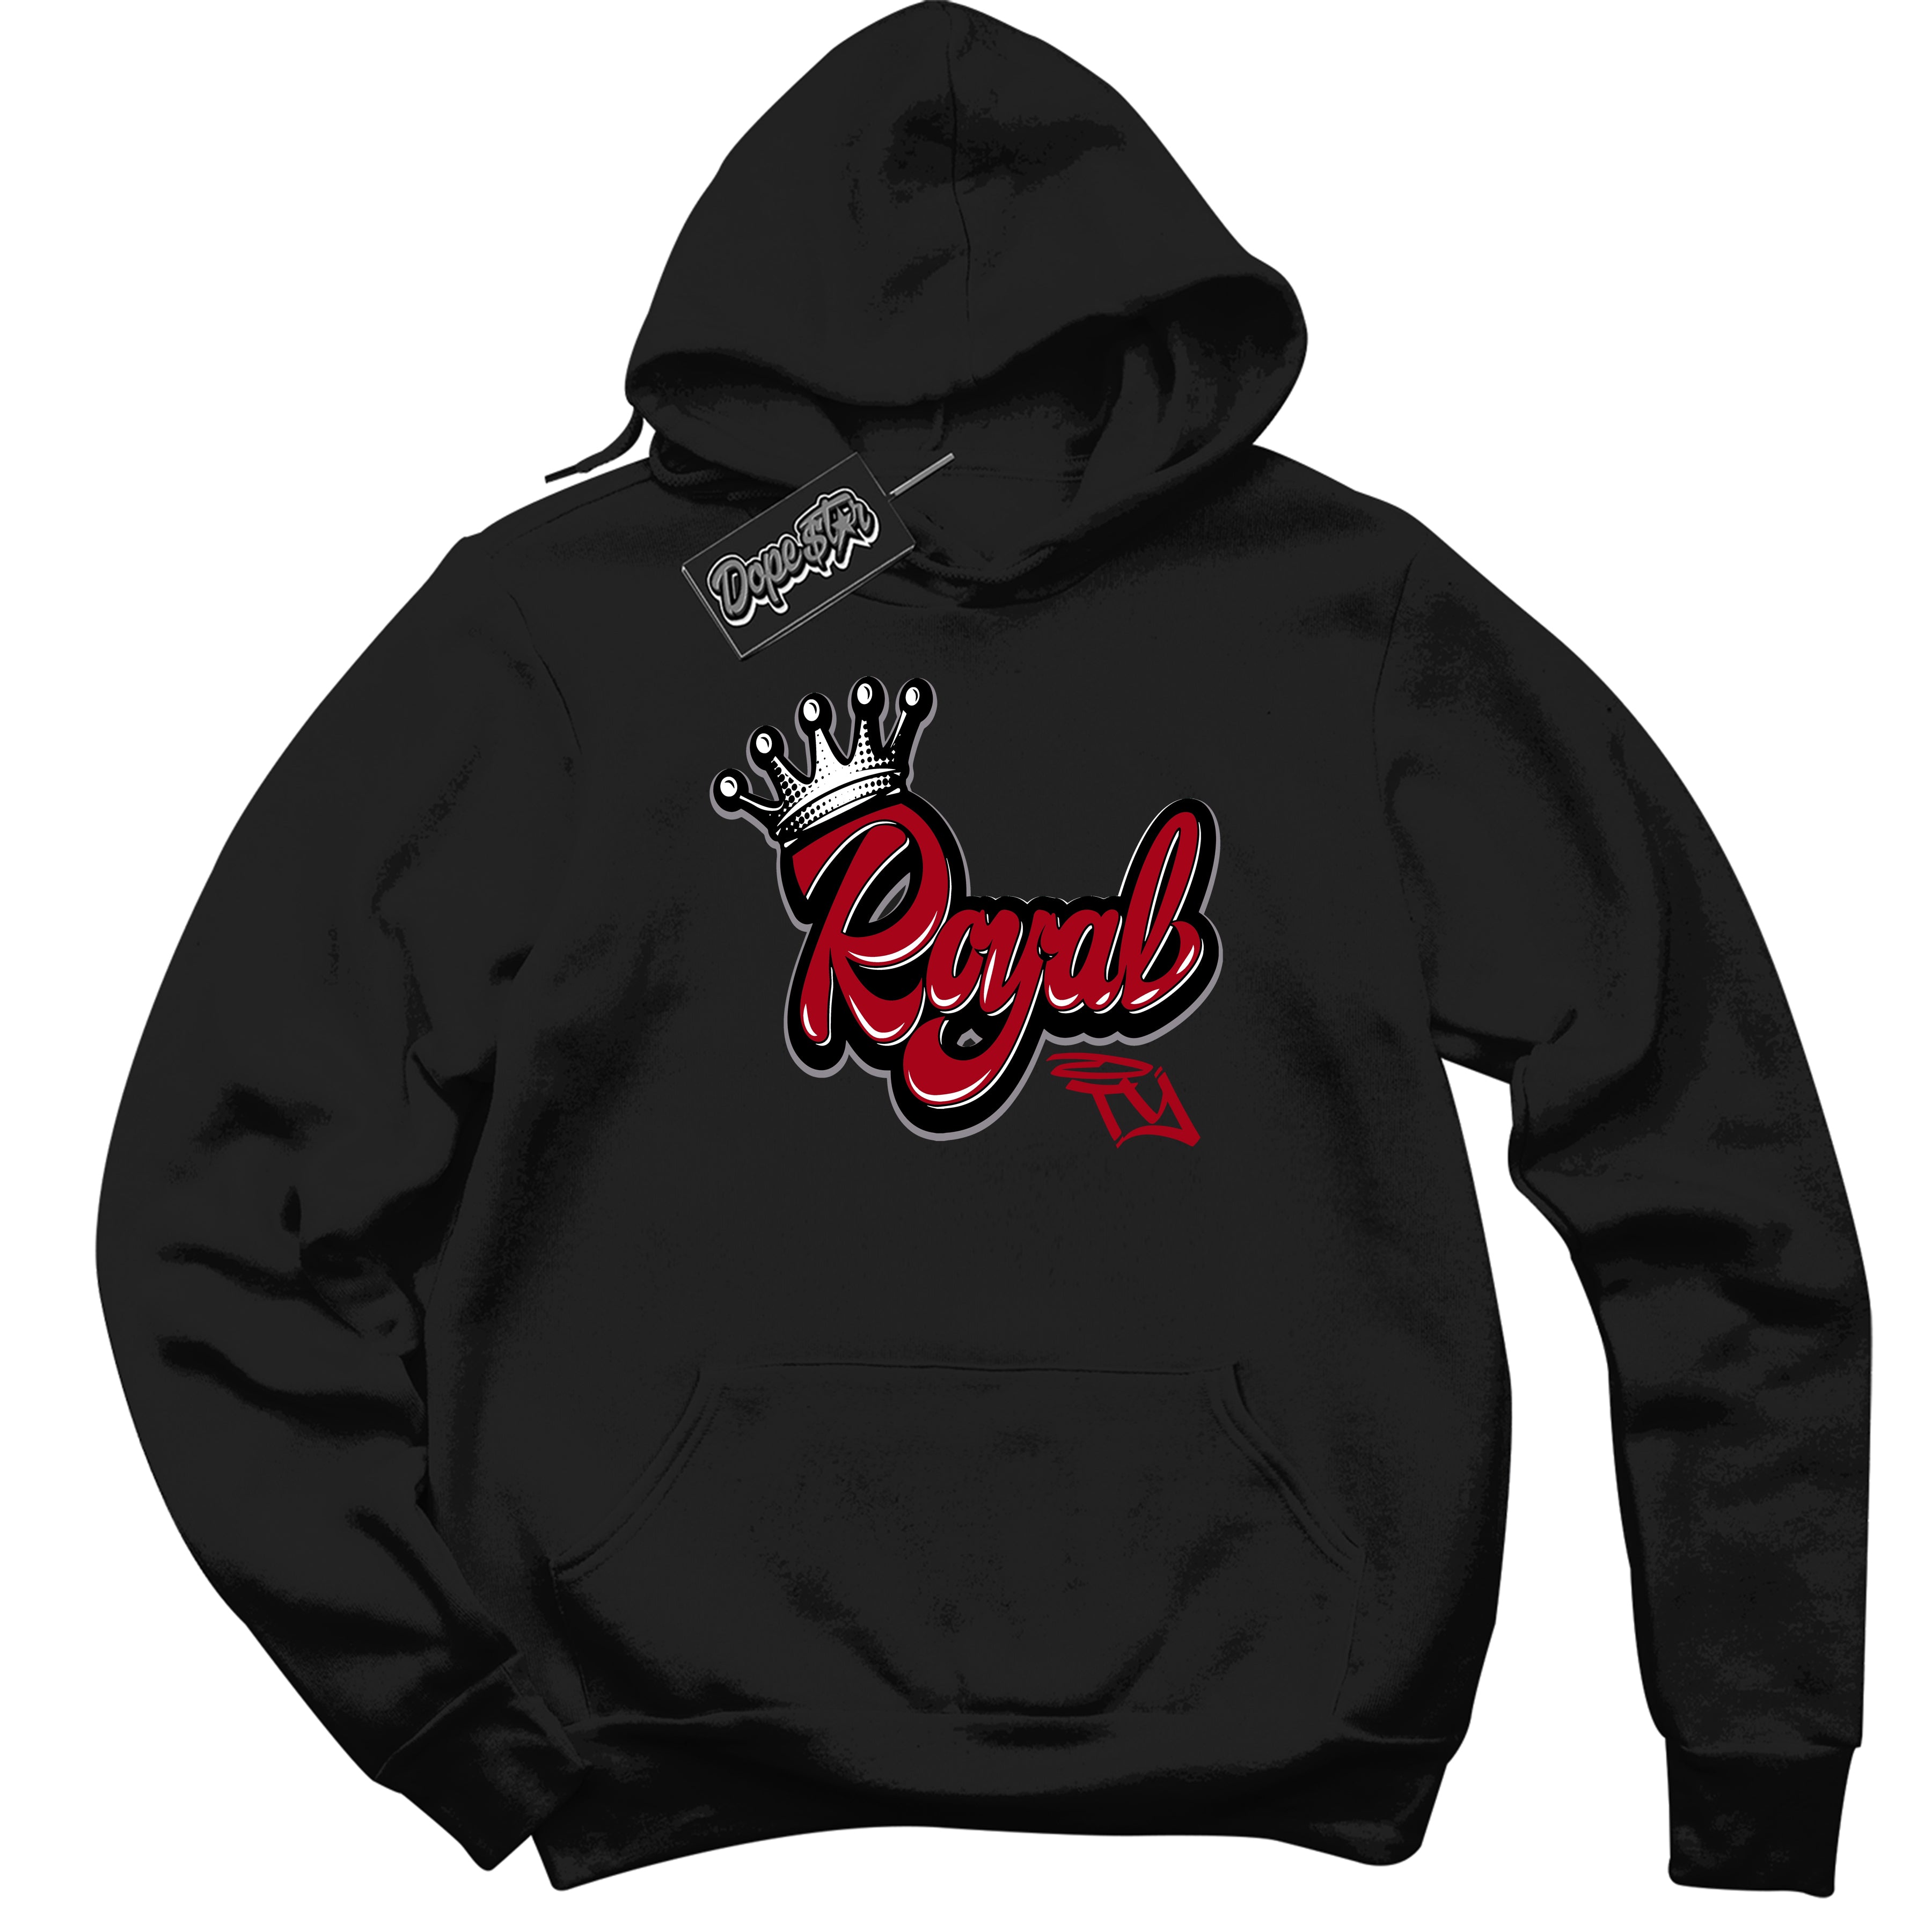 Cool Black Hoodie with “ Royalty ”  design that Perfectly Matches  Bred Reimagined 4s Jordans.